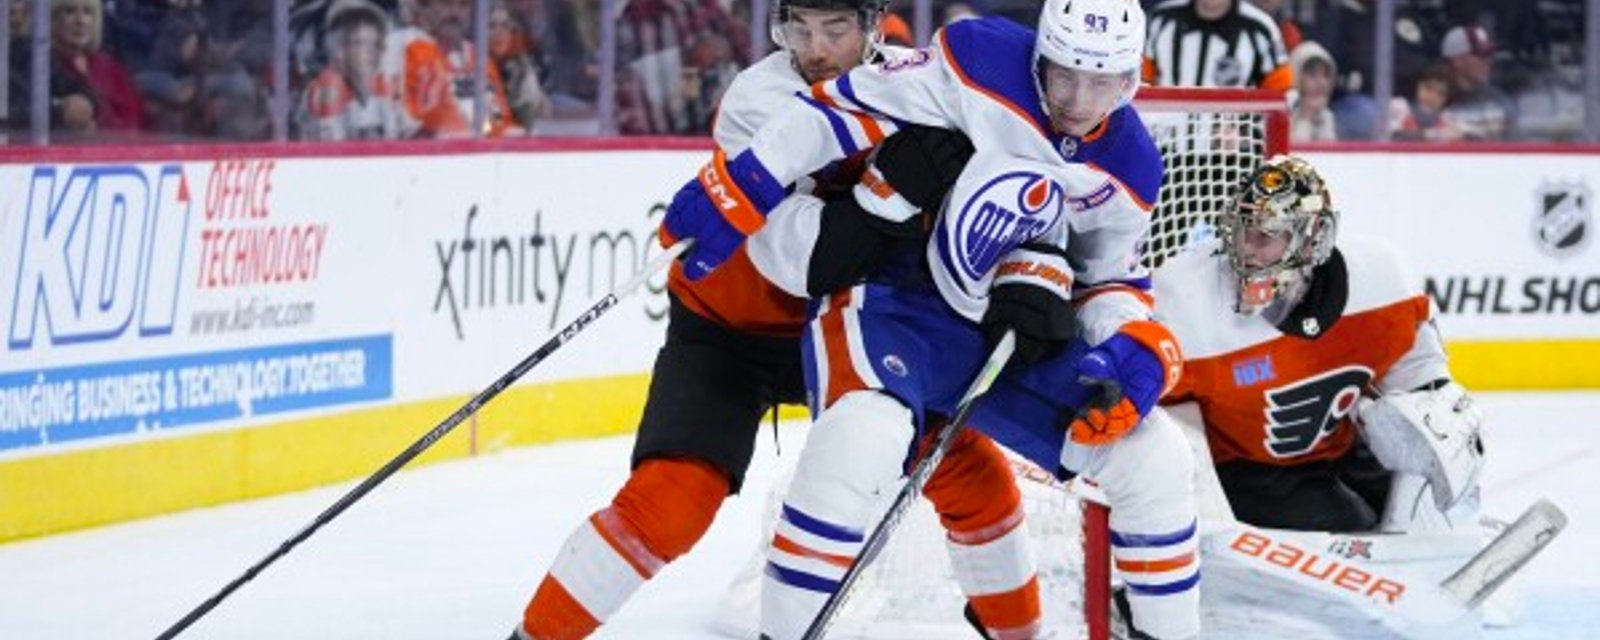 Trade involving two top players brewing between Oilers and Flyers?